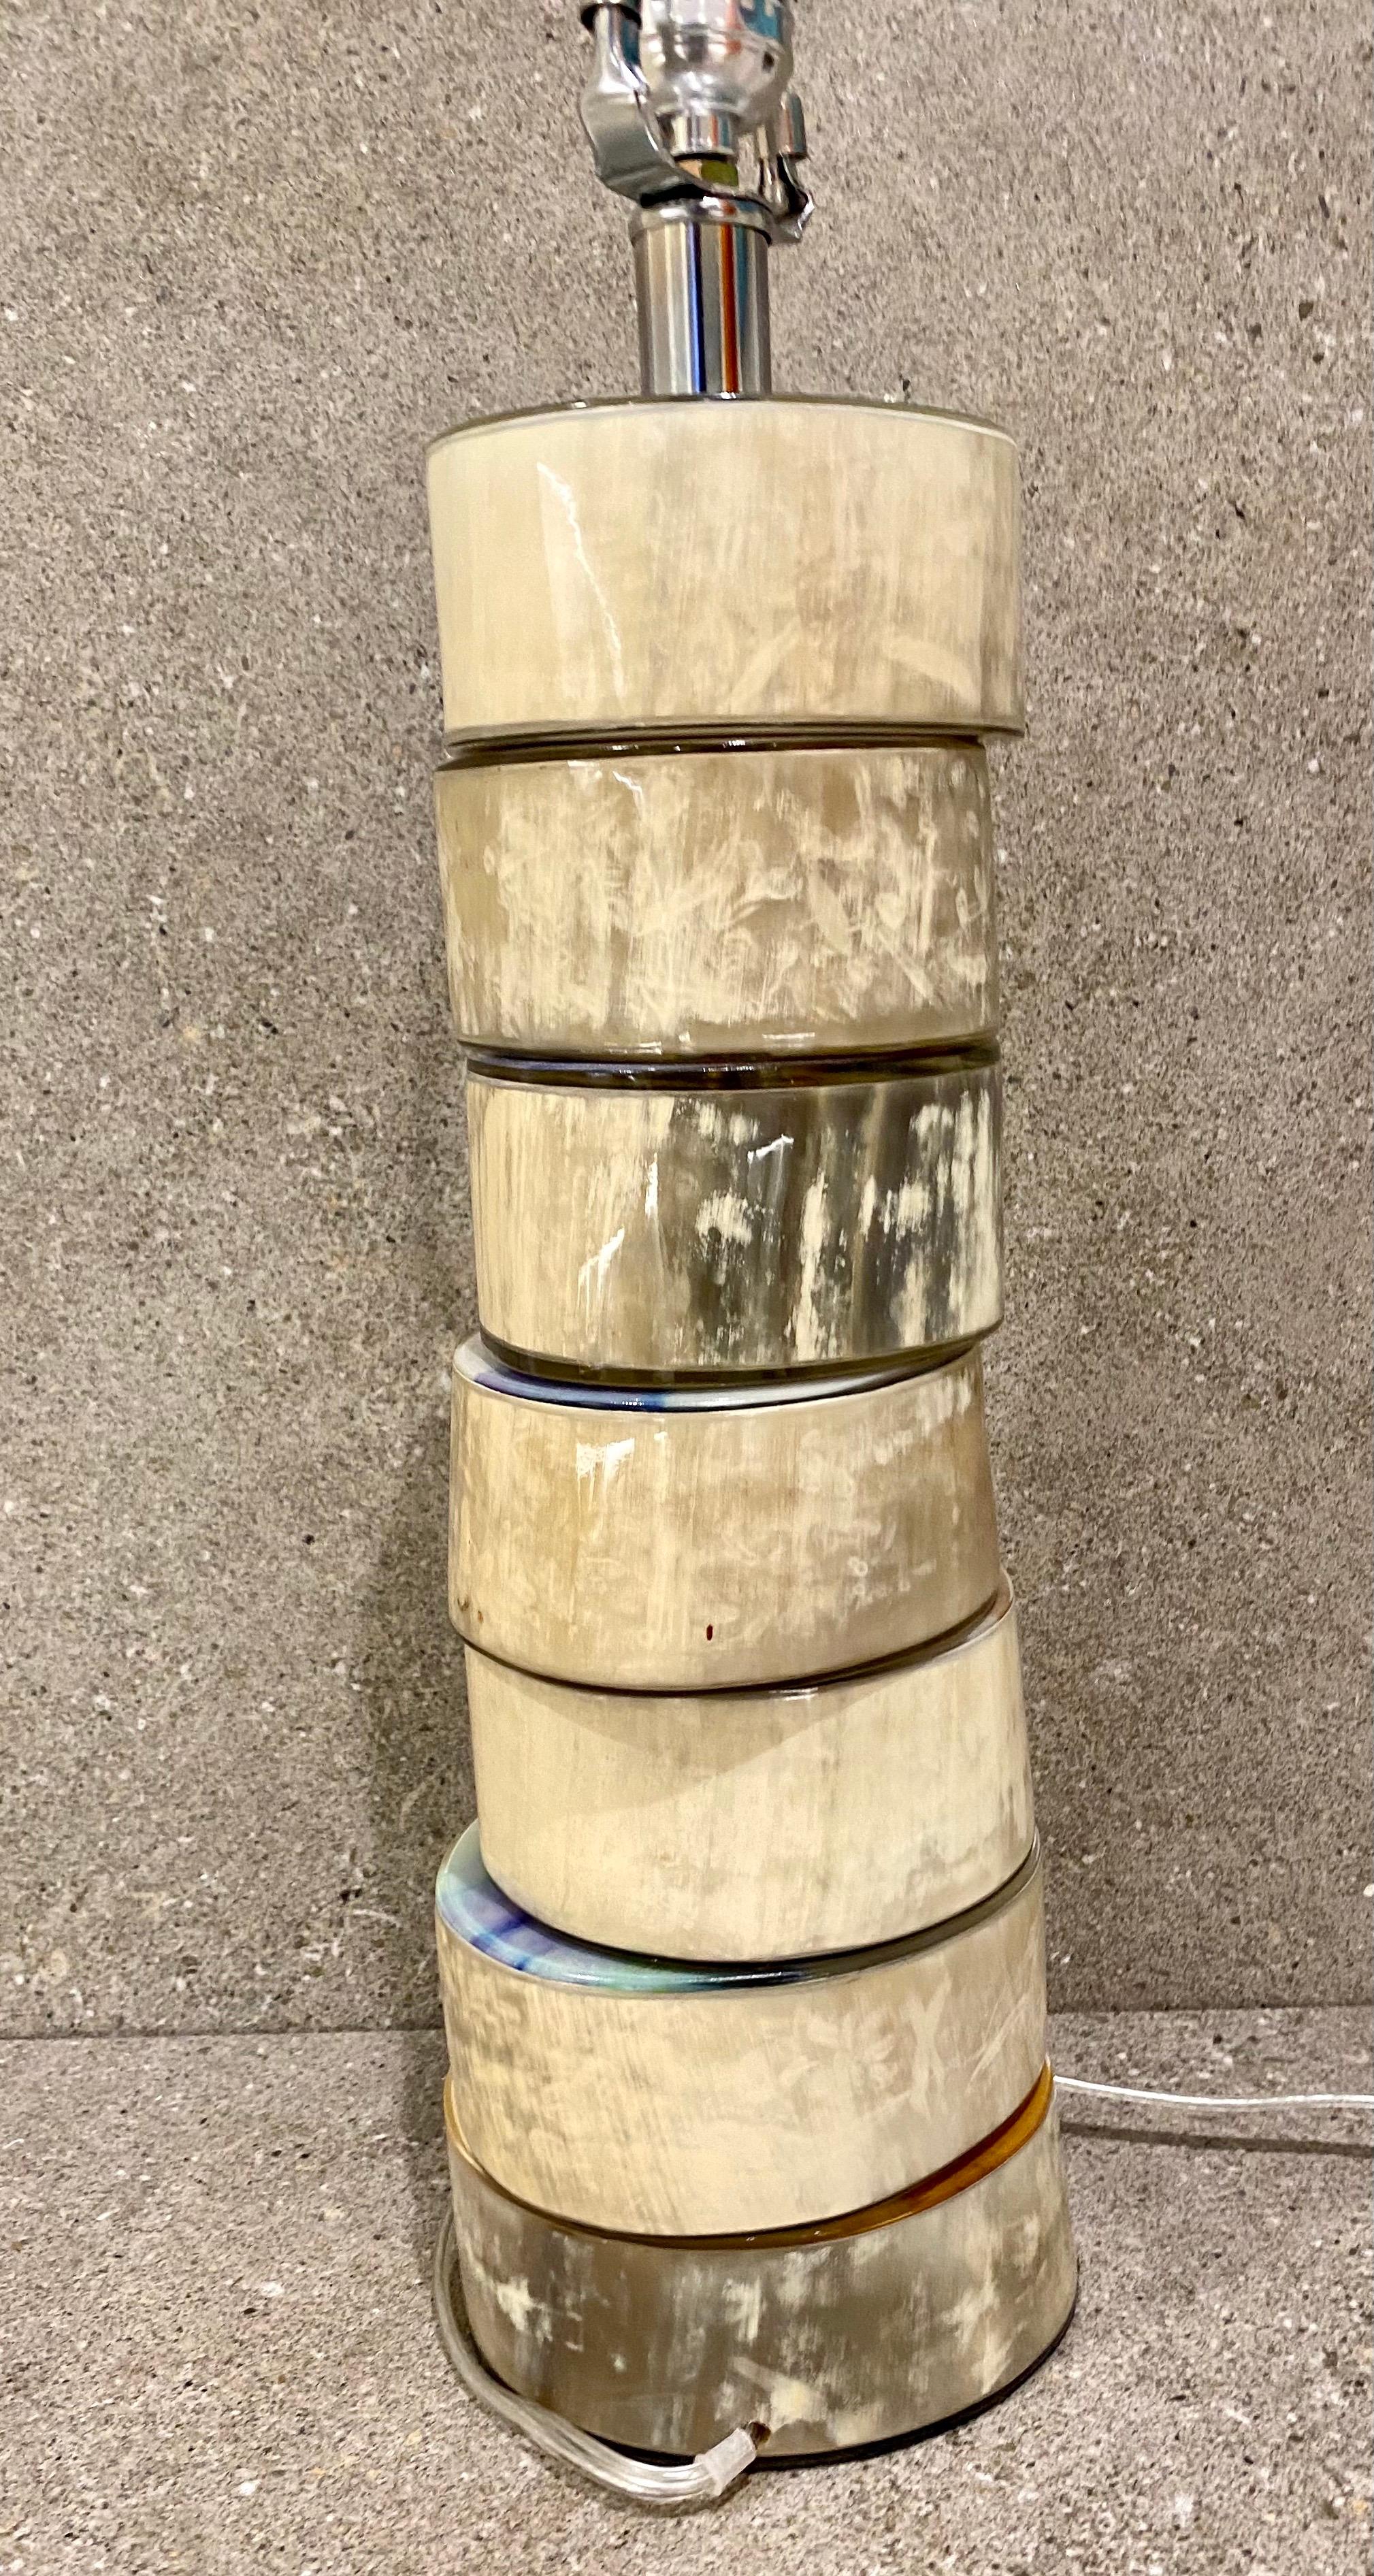 A Stylish stacked buffalo horn table lamp by Jamie Young. The base is a stack of disks made of genuine polished buffalo horn. Each disk has a narrow metal flange and is slightly off-set from its neighbor. The lamp powered on and off switch.